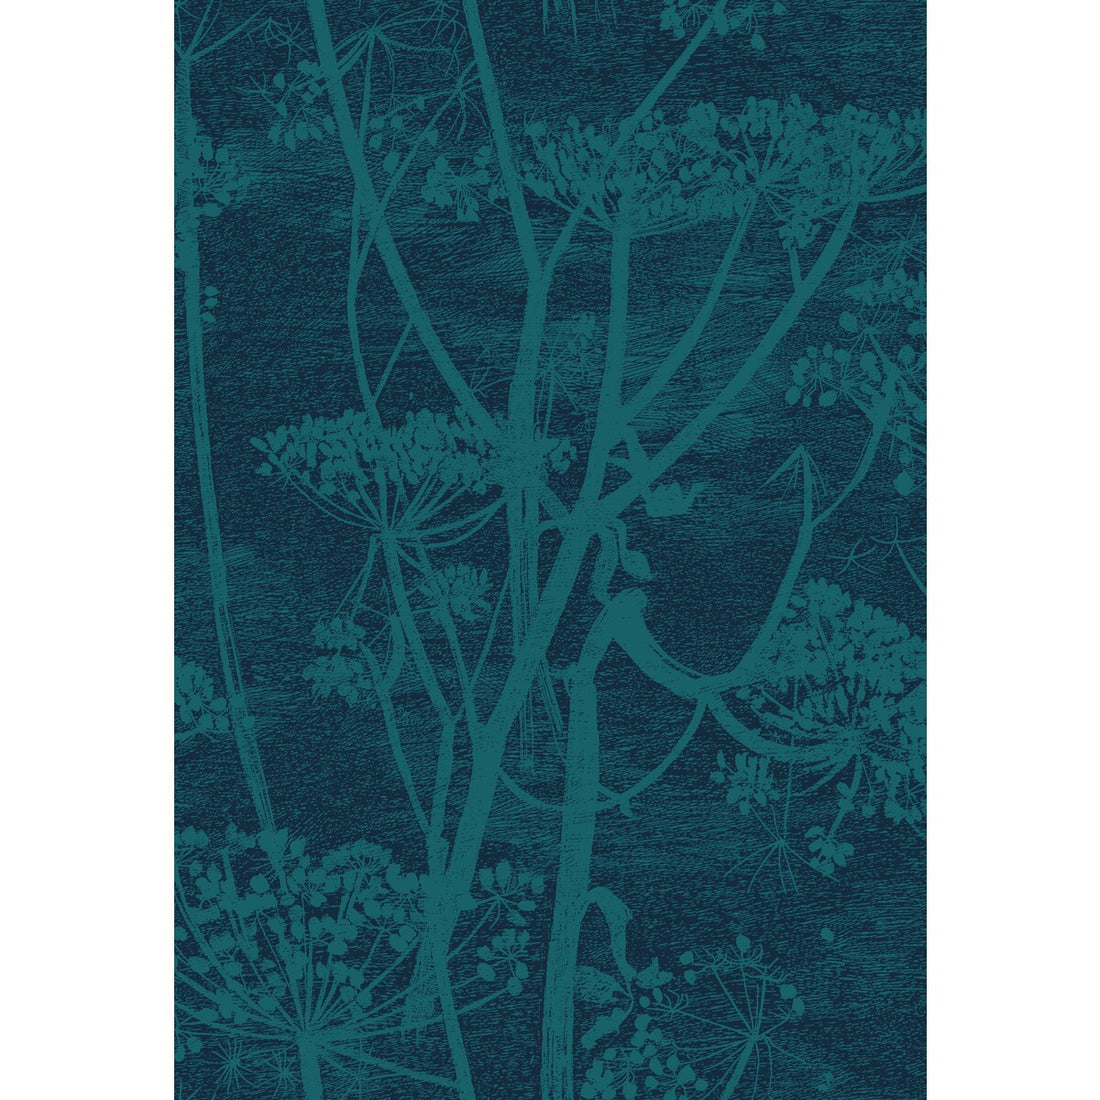 Cow Parsley fabric in petrol &amp; ink color - pattern F111/5015.CS.0 - by Cole &amp; Son in the Cole &amp; Son Contemporary Fabrics collection